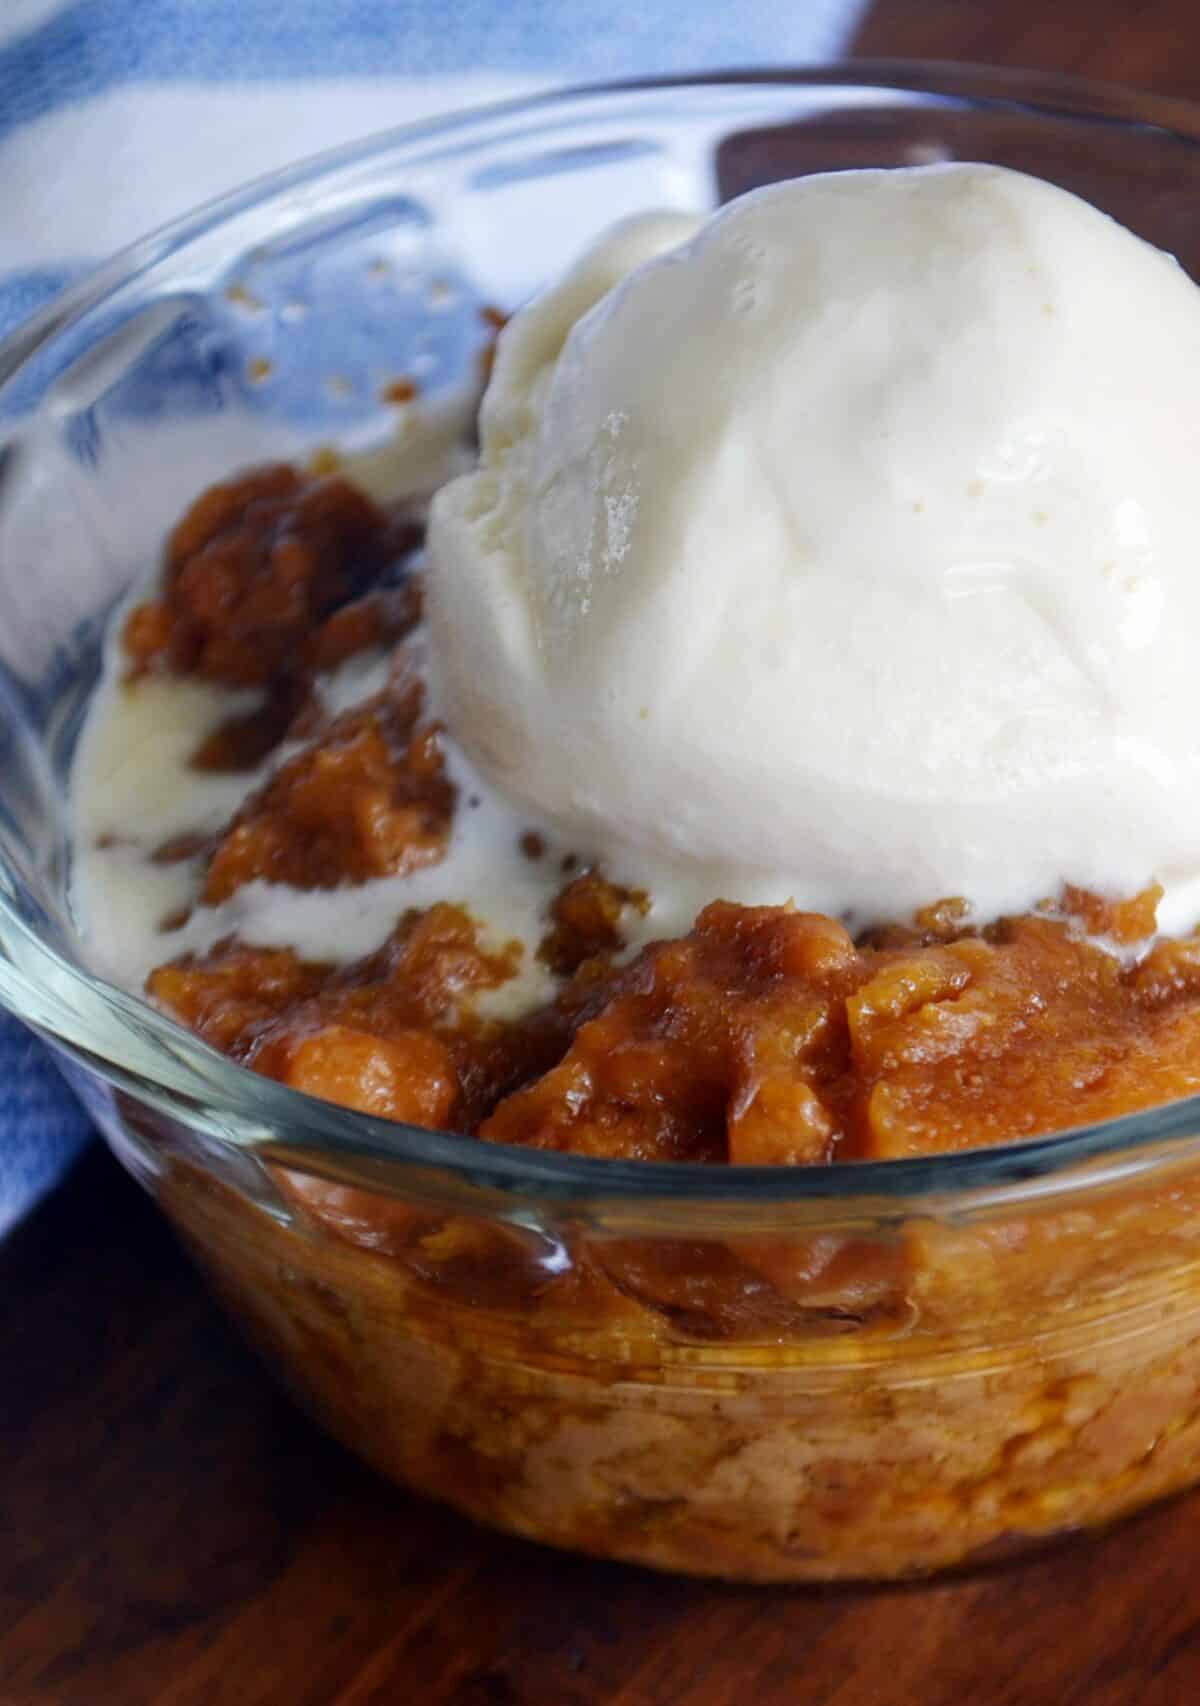  This classic New England dessert gets a spicy twist with our Slow Cooker Indian Pudding recipe.